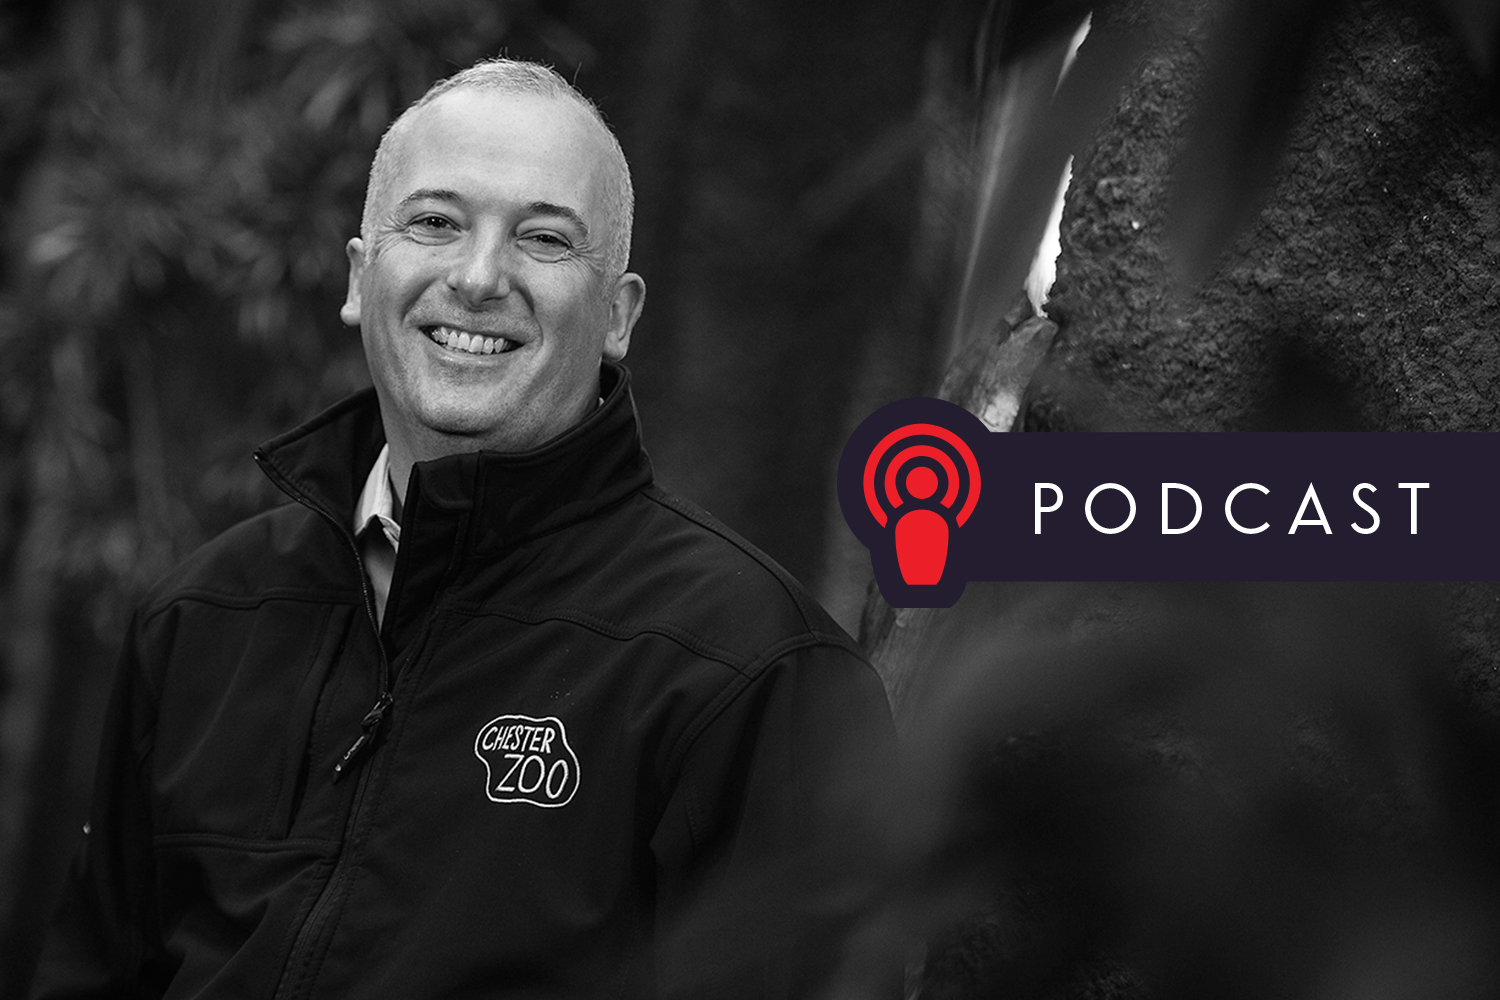 Podcast: Meet the Man Behind Chester Zoo’s Record Breaking Year - LUYA